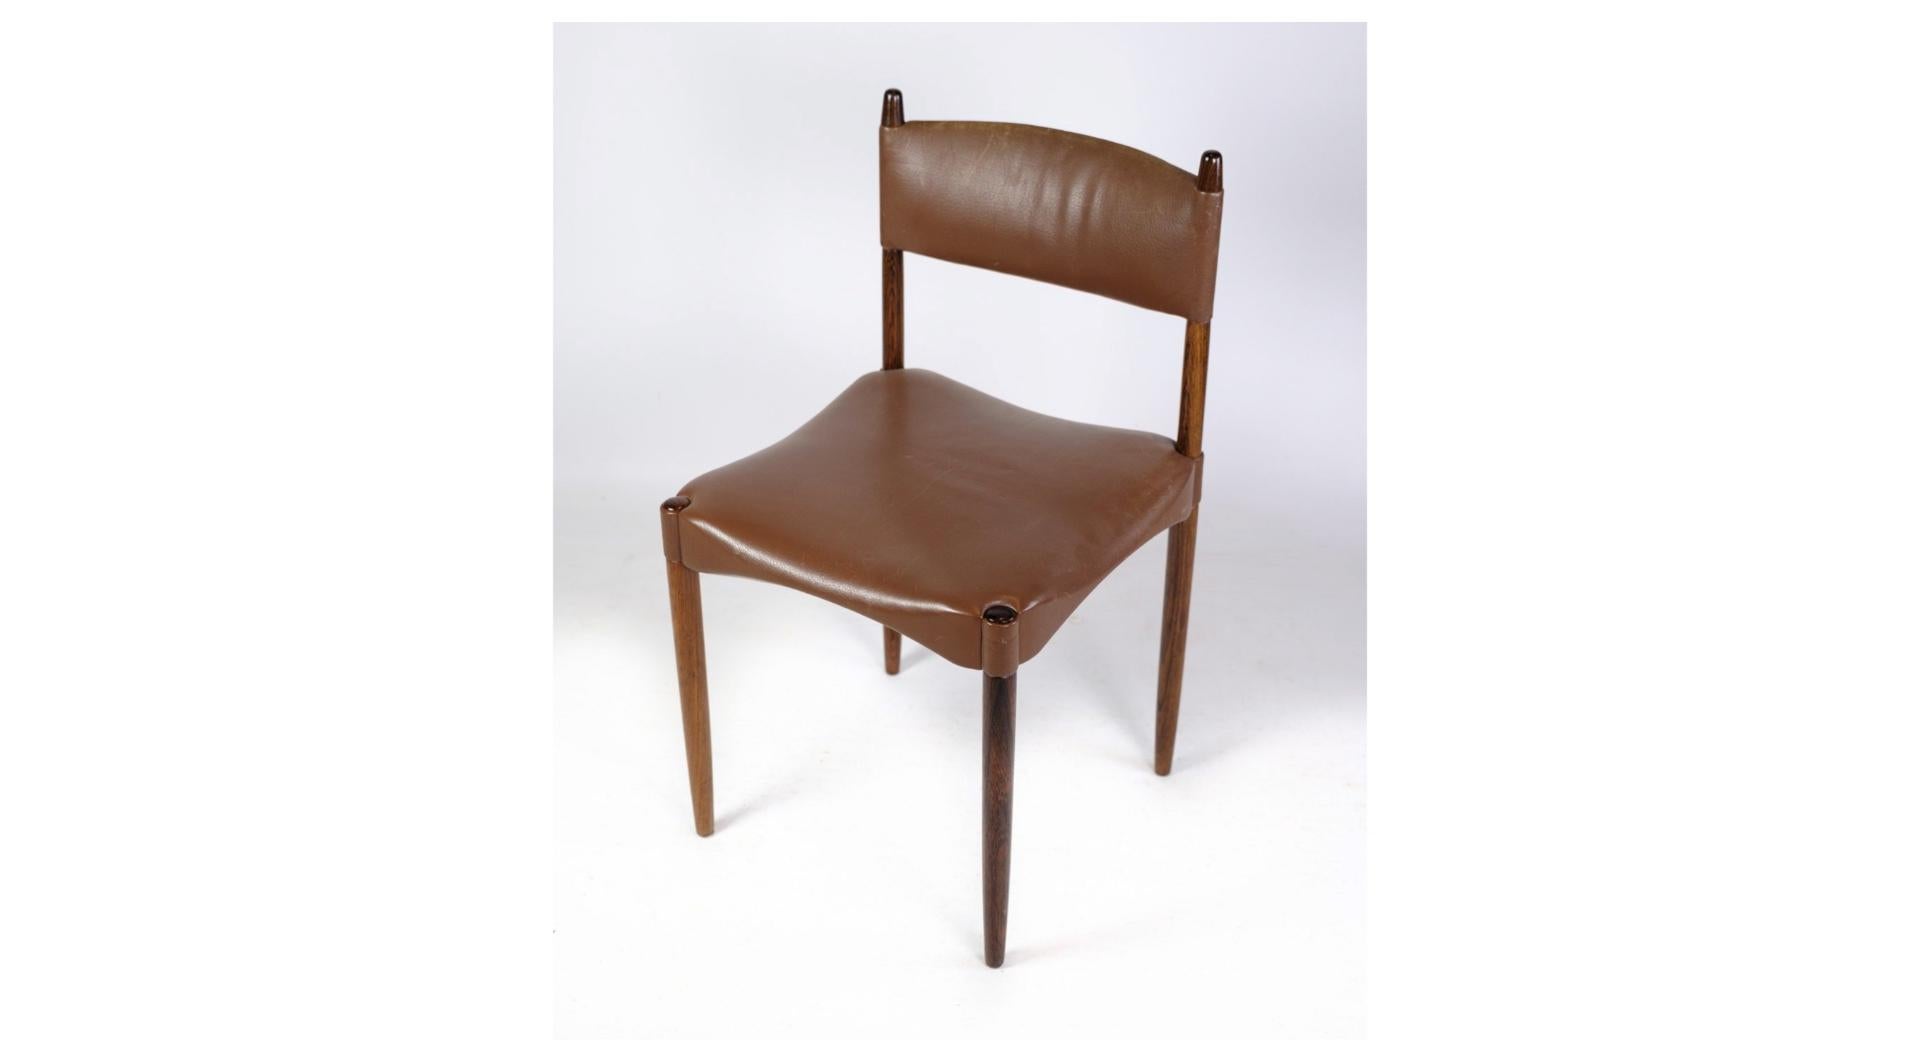 This set of six chairs, crafted from solid rosewood and upholstered in rich brown leather, epitomizes the elegance and craftsmanship of Danish mid-century design.

The chairs feature a timeless silhouette with clean lines and organic curves,